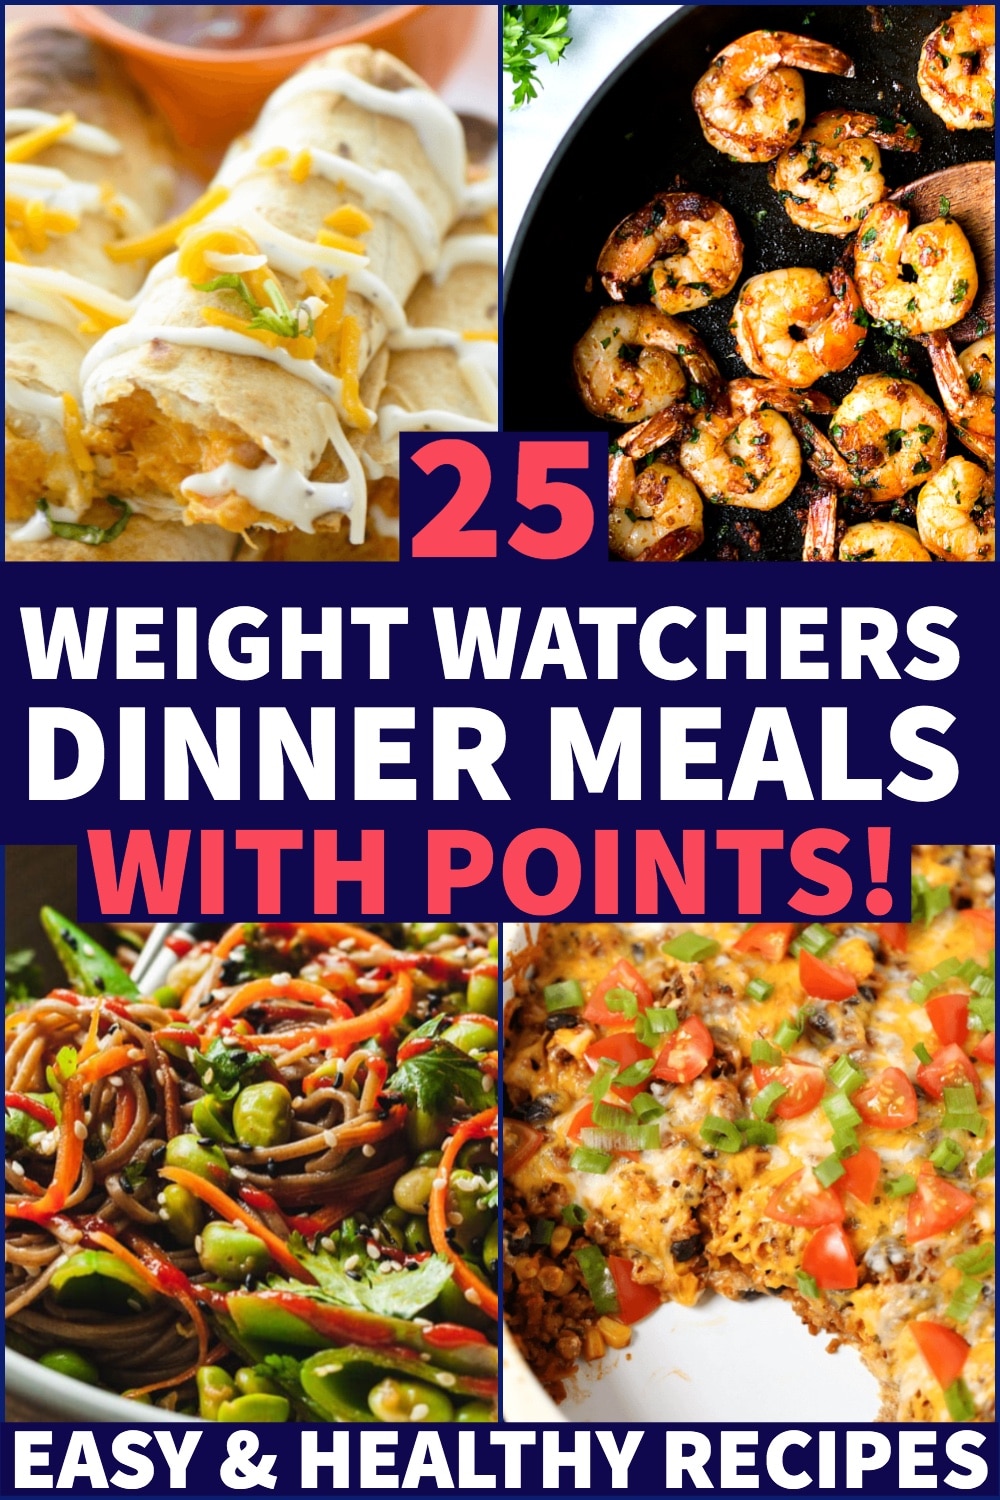 Weight Watchers Meals for Dinner With Points! 25 Easy Meals